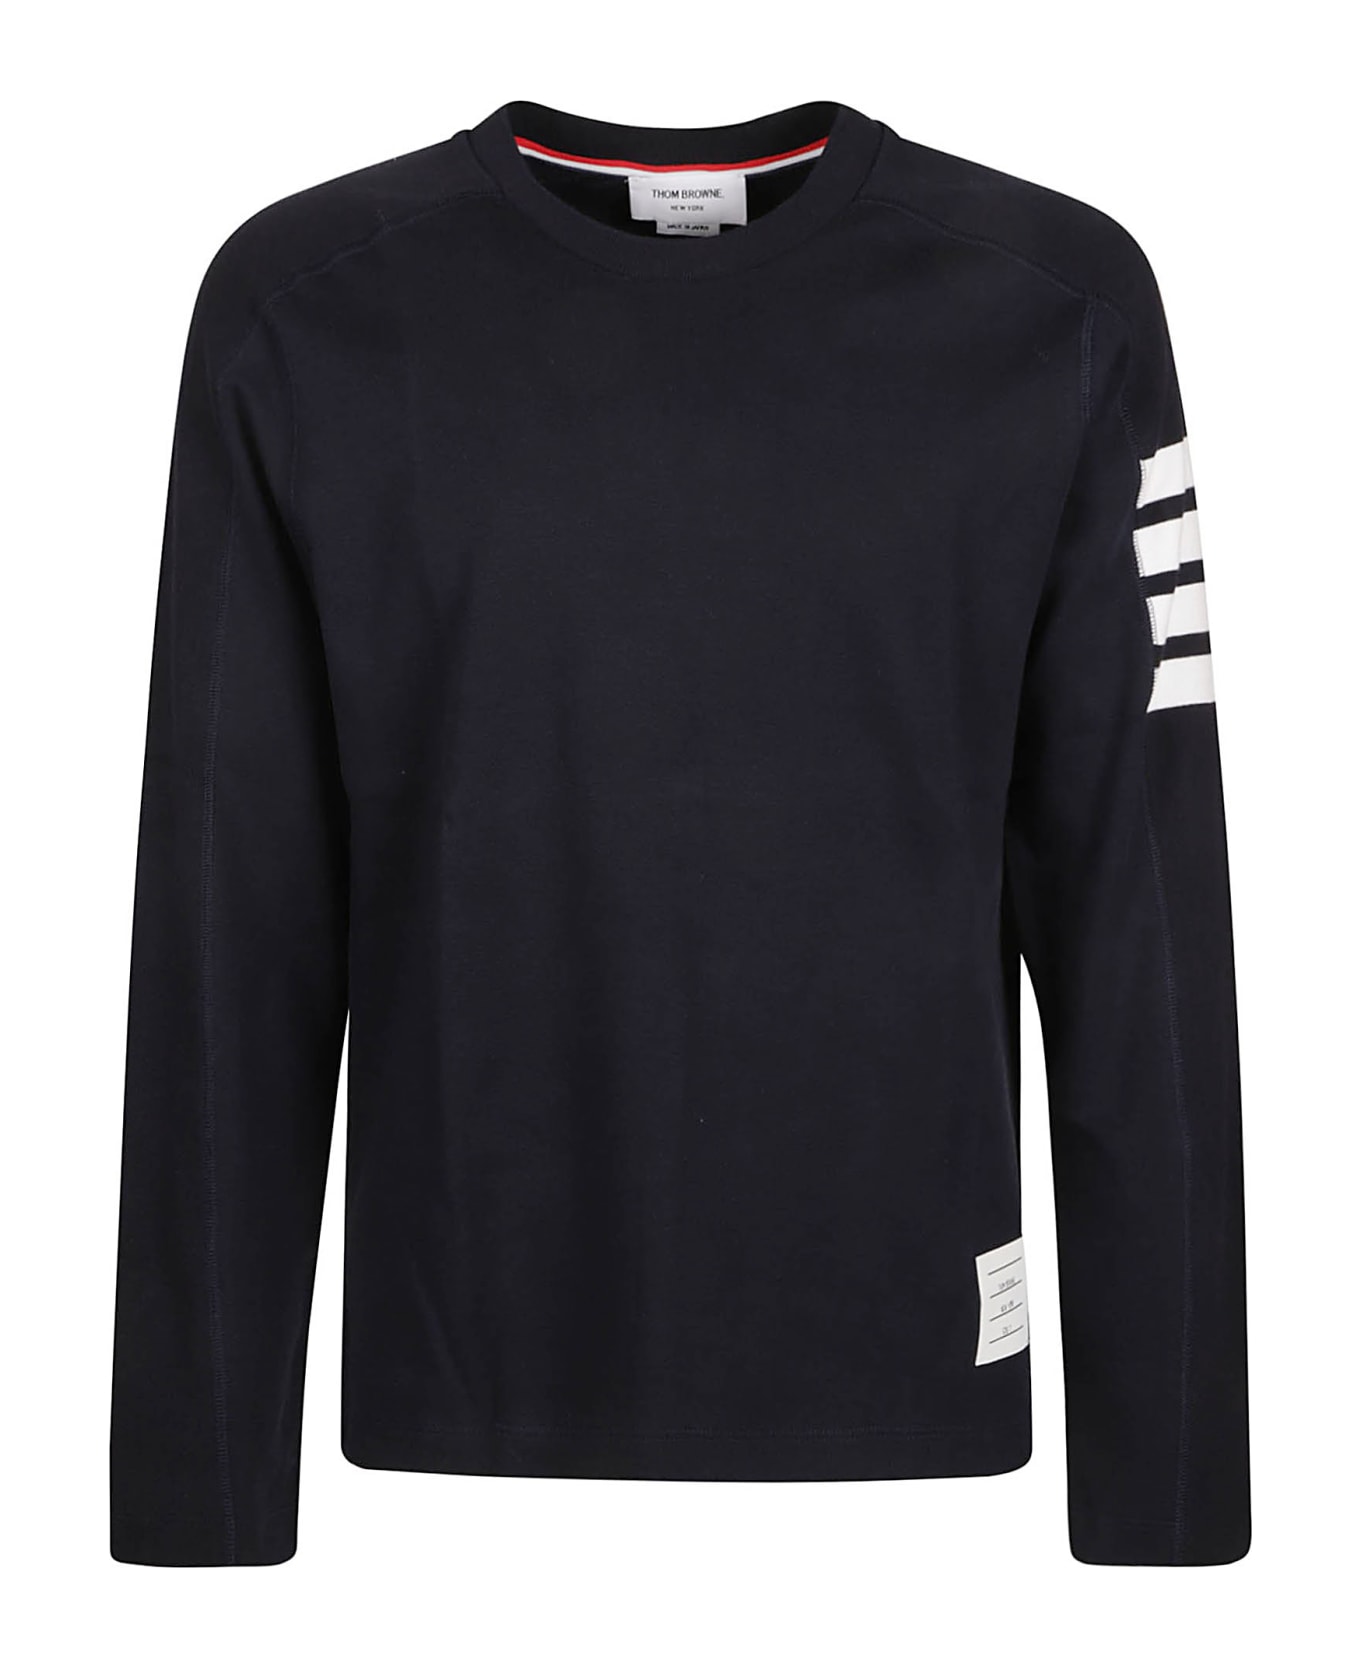 Thom Browne Long Sleeve Jersey - Navy